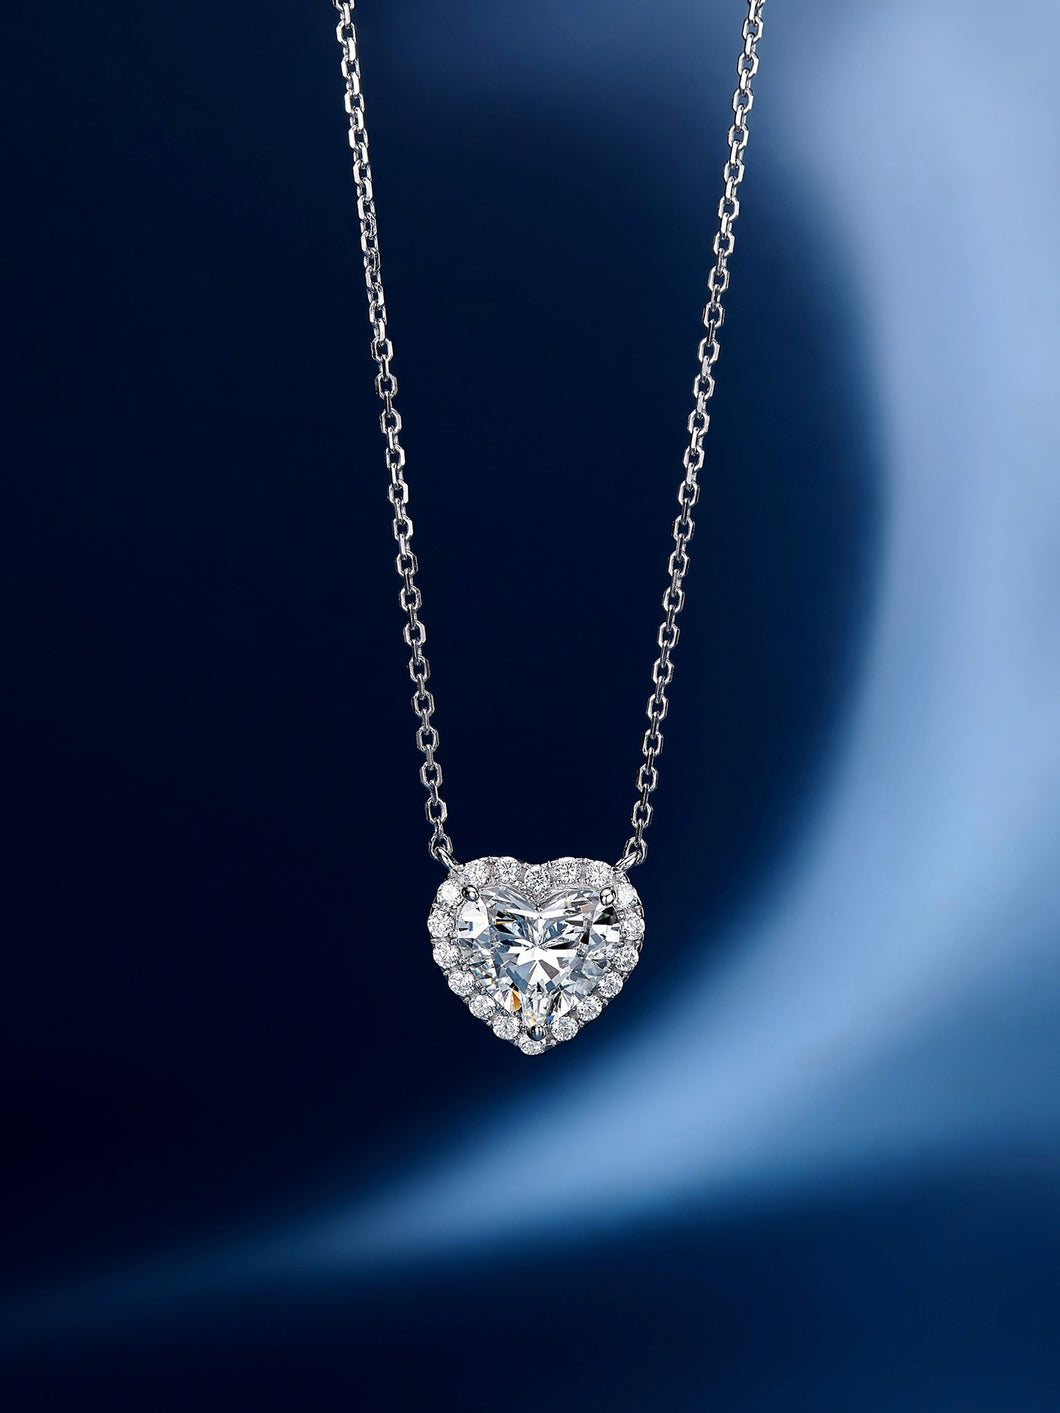 Celebrate Love with Our 2CT Heart Cut Diamond Necklace